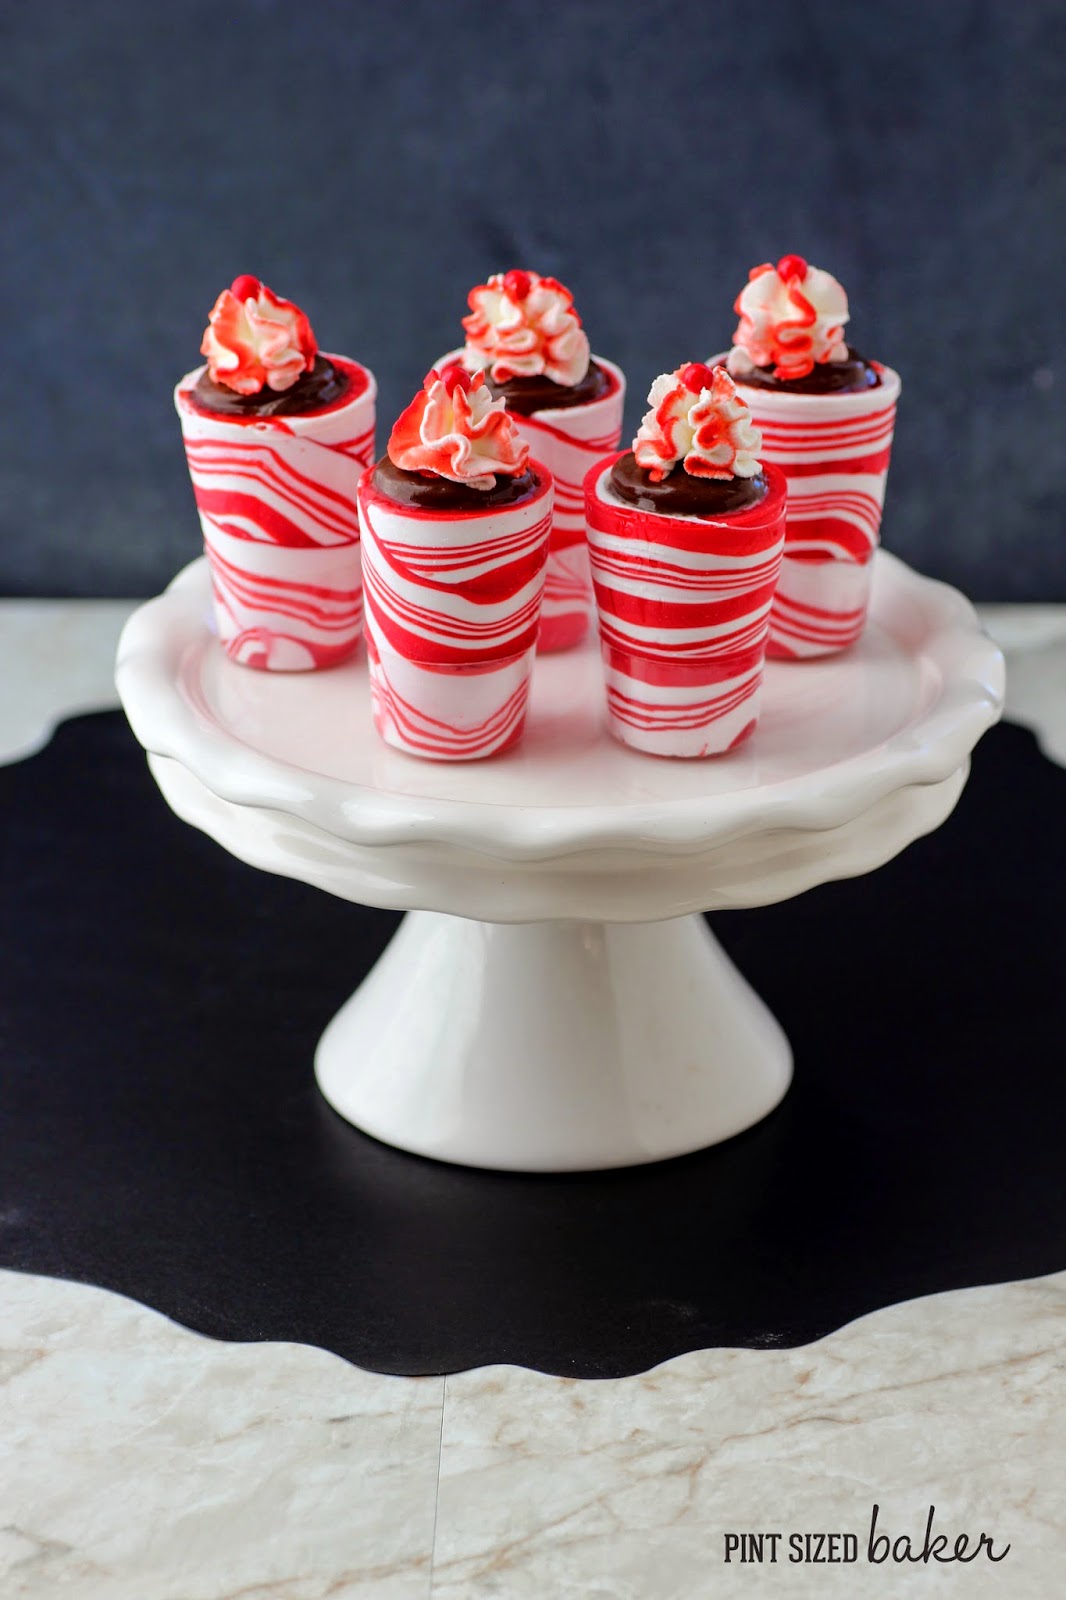 These Chocolate Pudding Shooters taste so yummy! I love the way the peppermint shooters taste with chocolate pudding! They are fun to serve at a party.